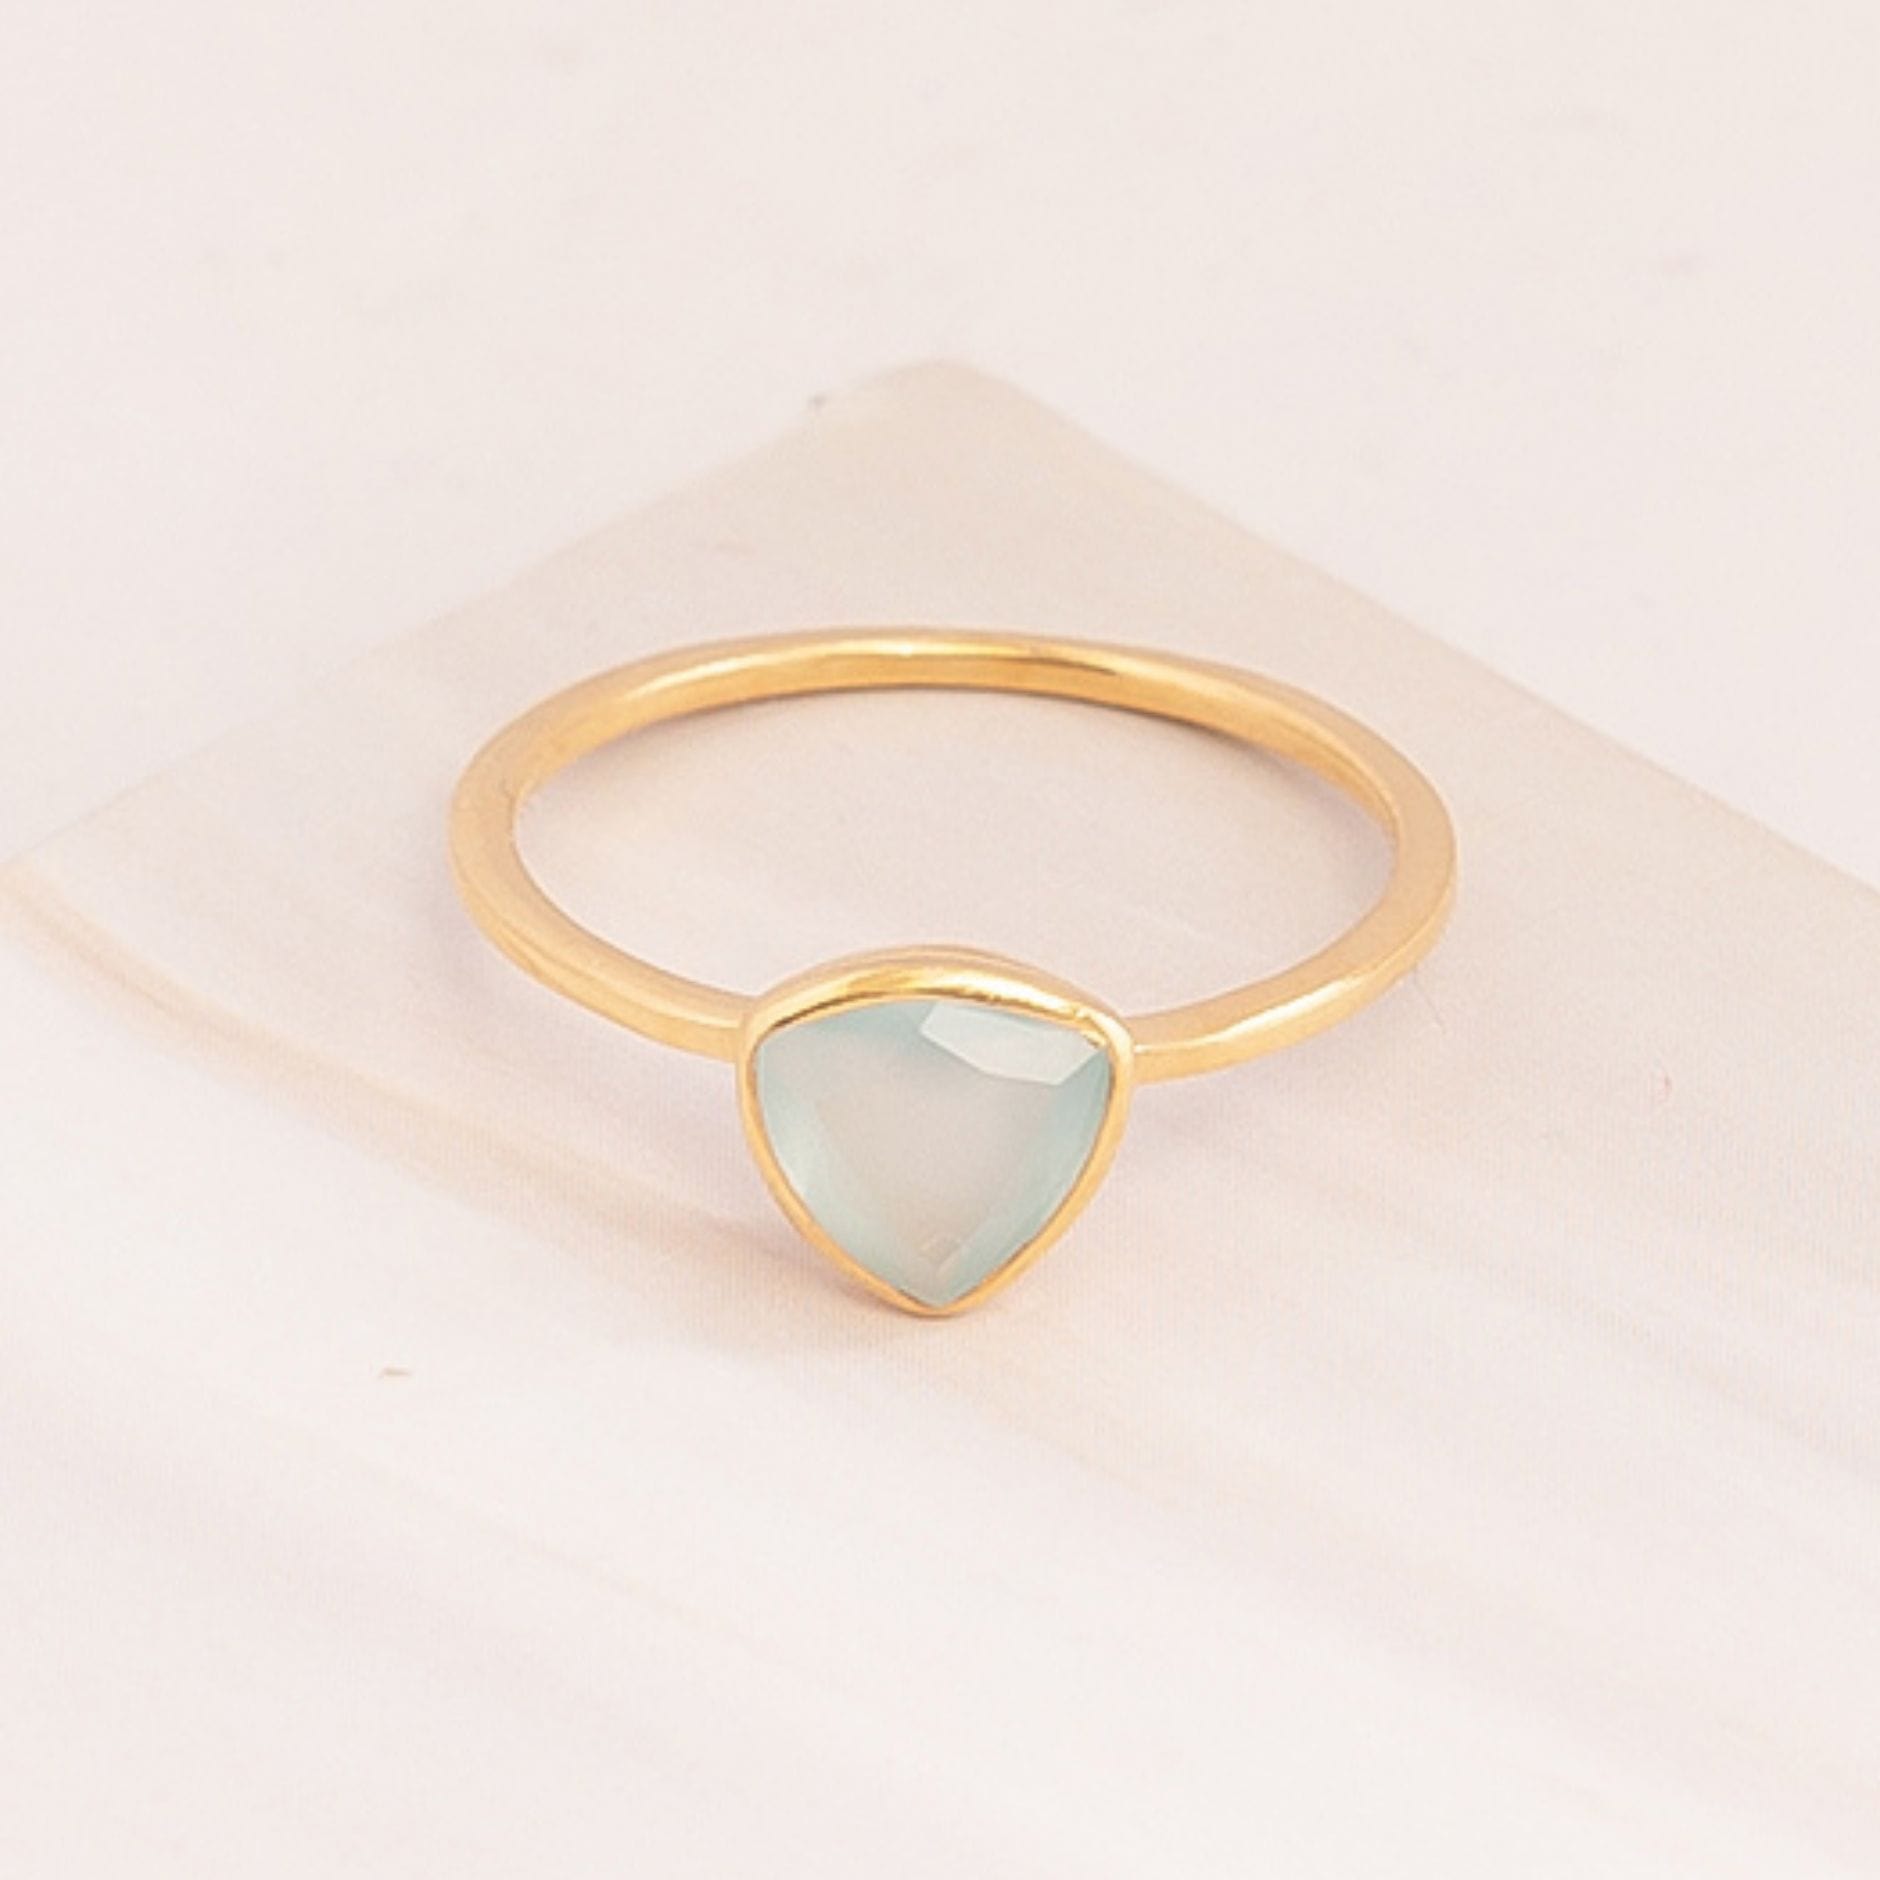 Emblem Jewelry Rings Chalcedony / Triangle Signature Candy Gemstone Stack Rings (Ring Size 5)